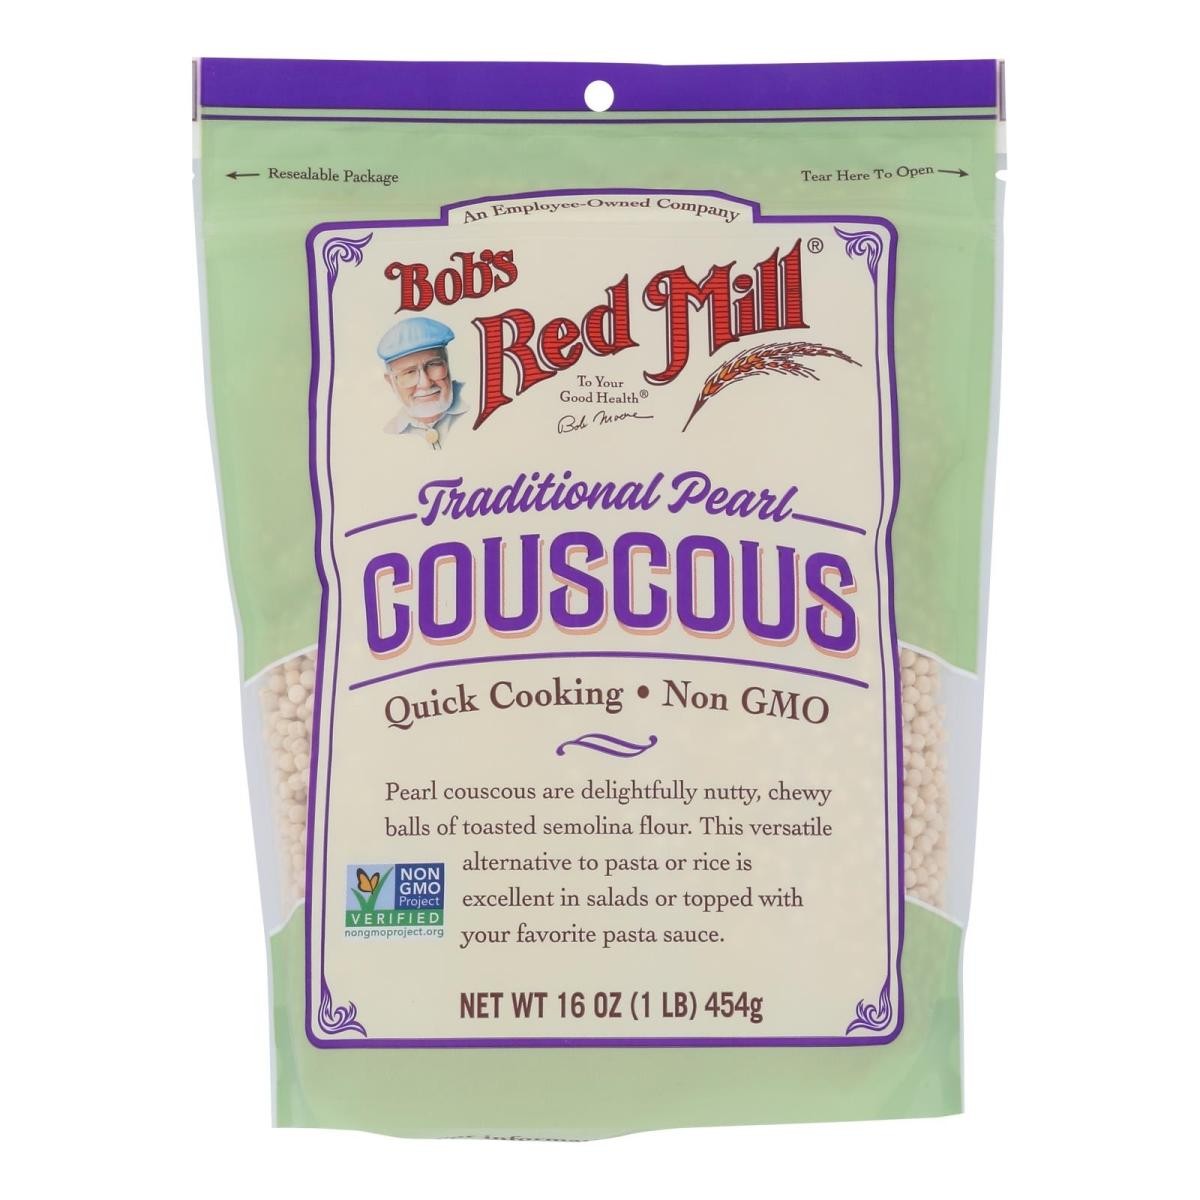 Bob's Red Mill Traditional Pearl Couscous 16 Oz Resealable Pouch